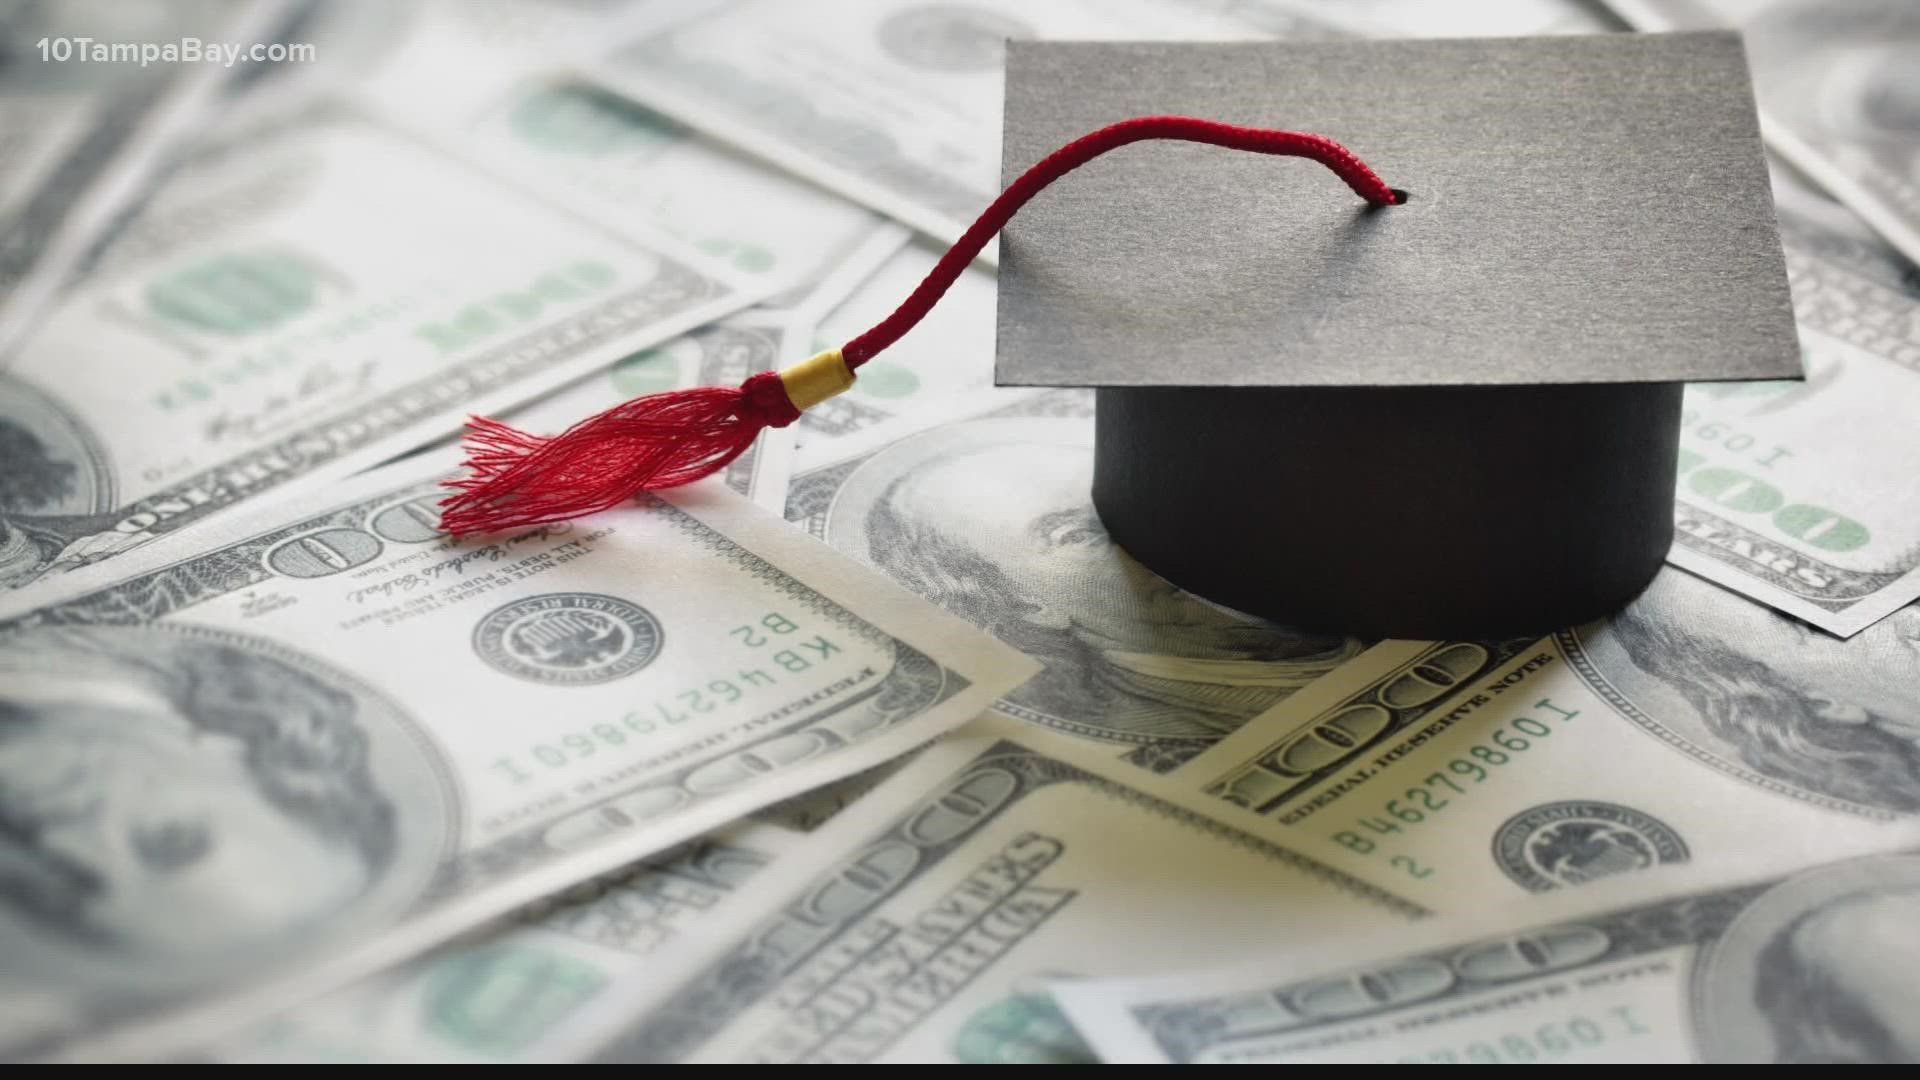 President Biden’s Department of Education has focused on “discharging” student loans for borrowers affected by permanent disability or school closures.